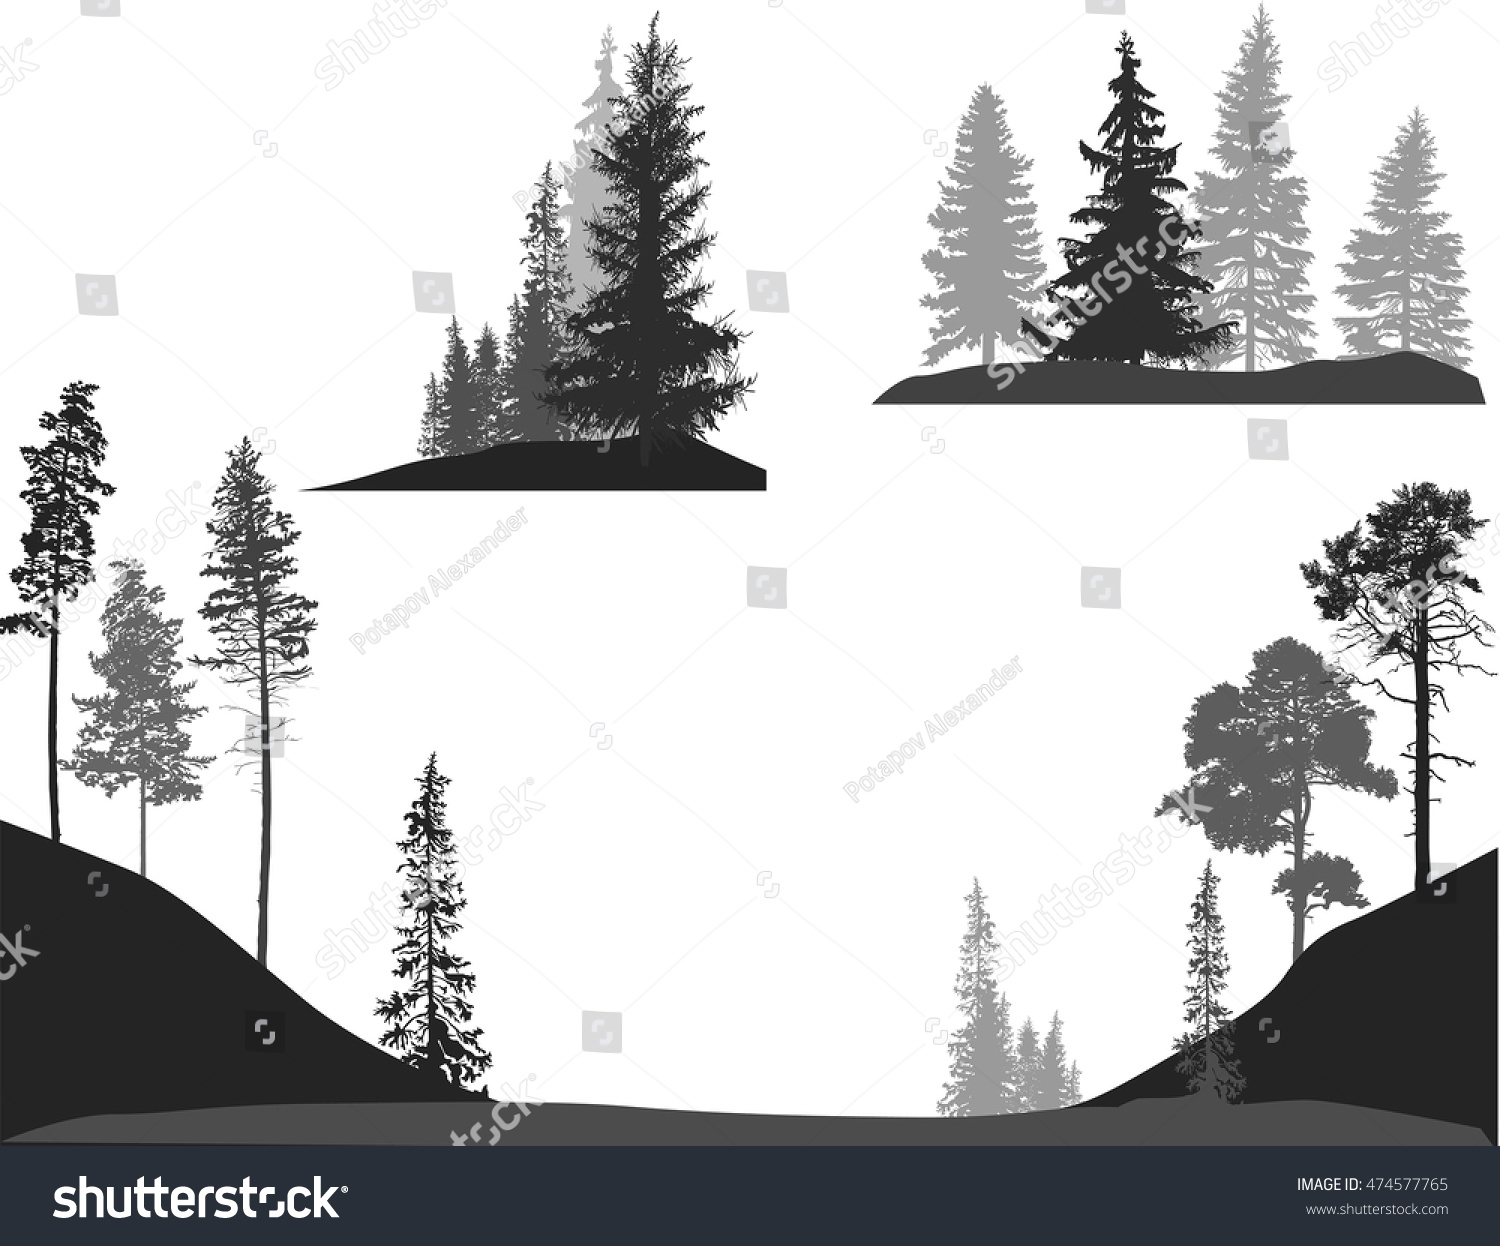 Illustration Trees Set Isolated On White Stock Vector Royalty Free Shutterstock